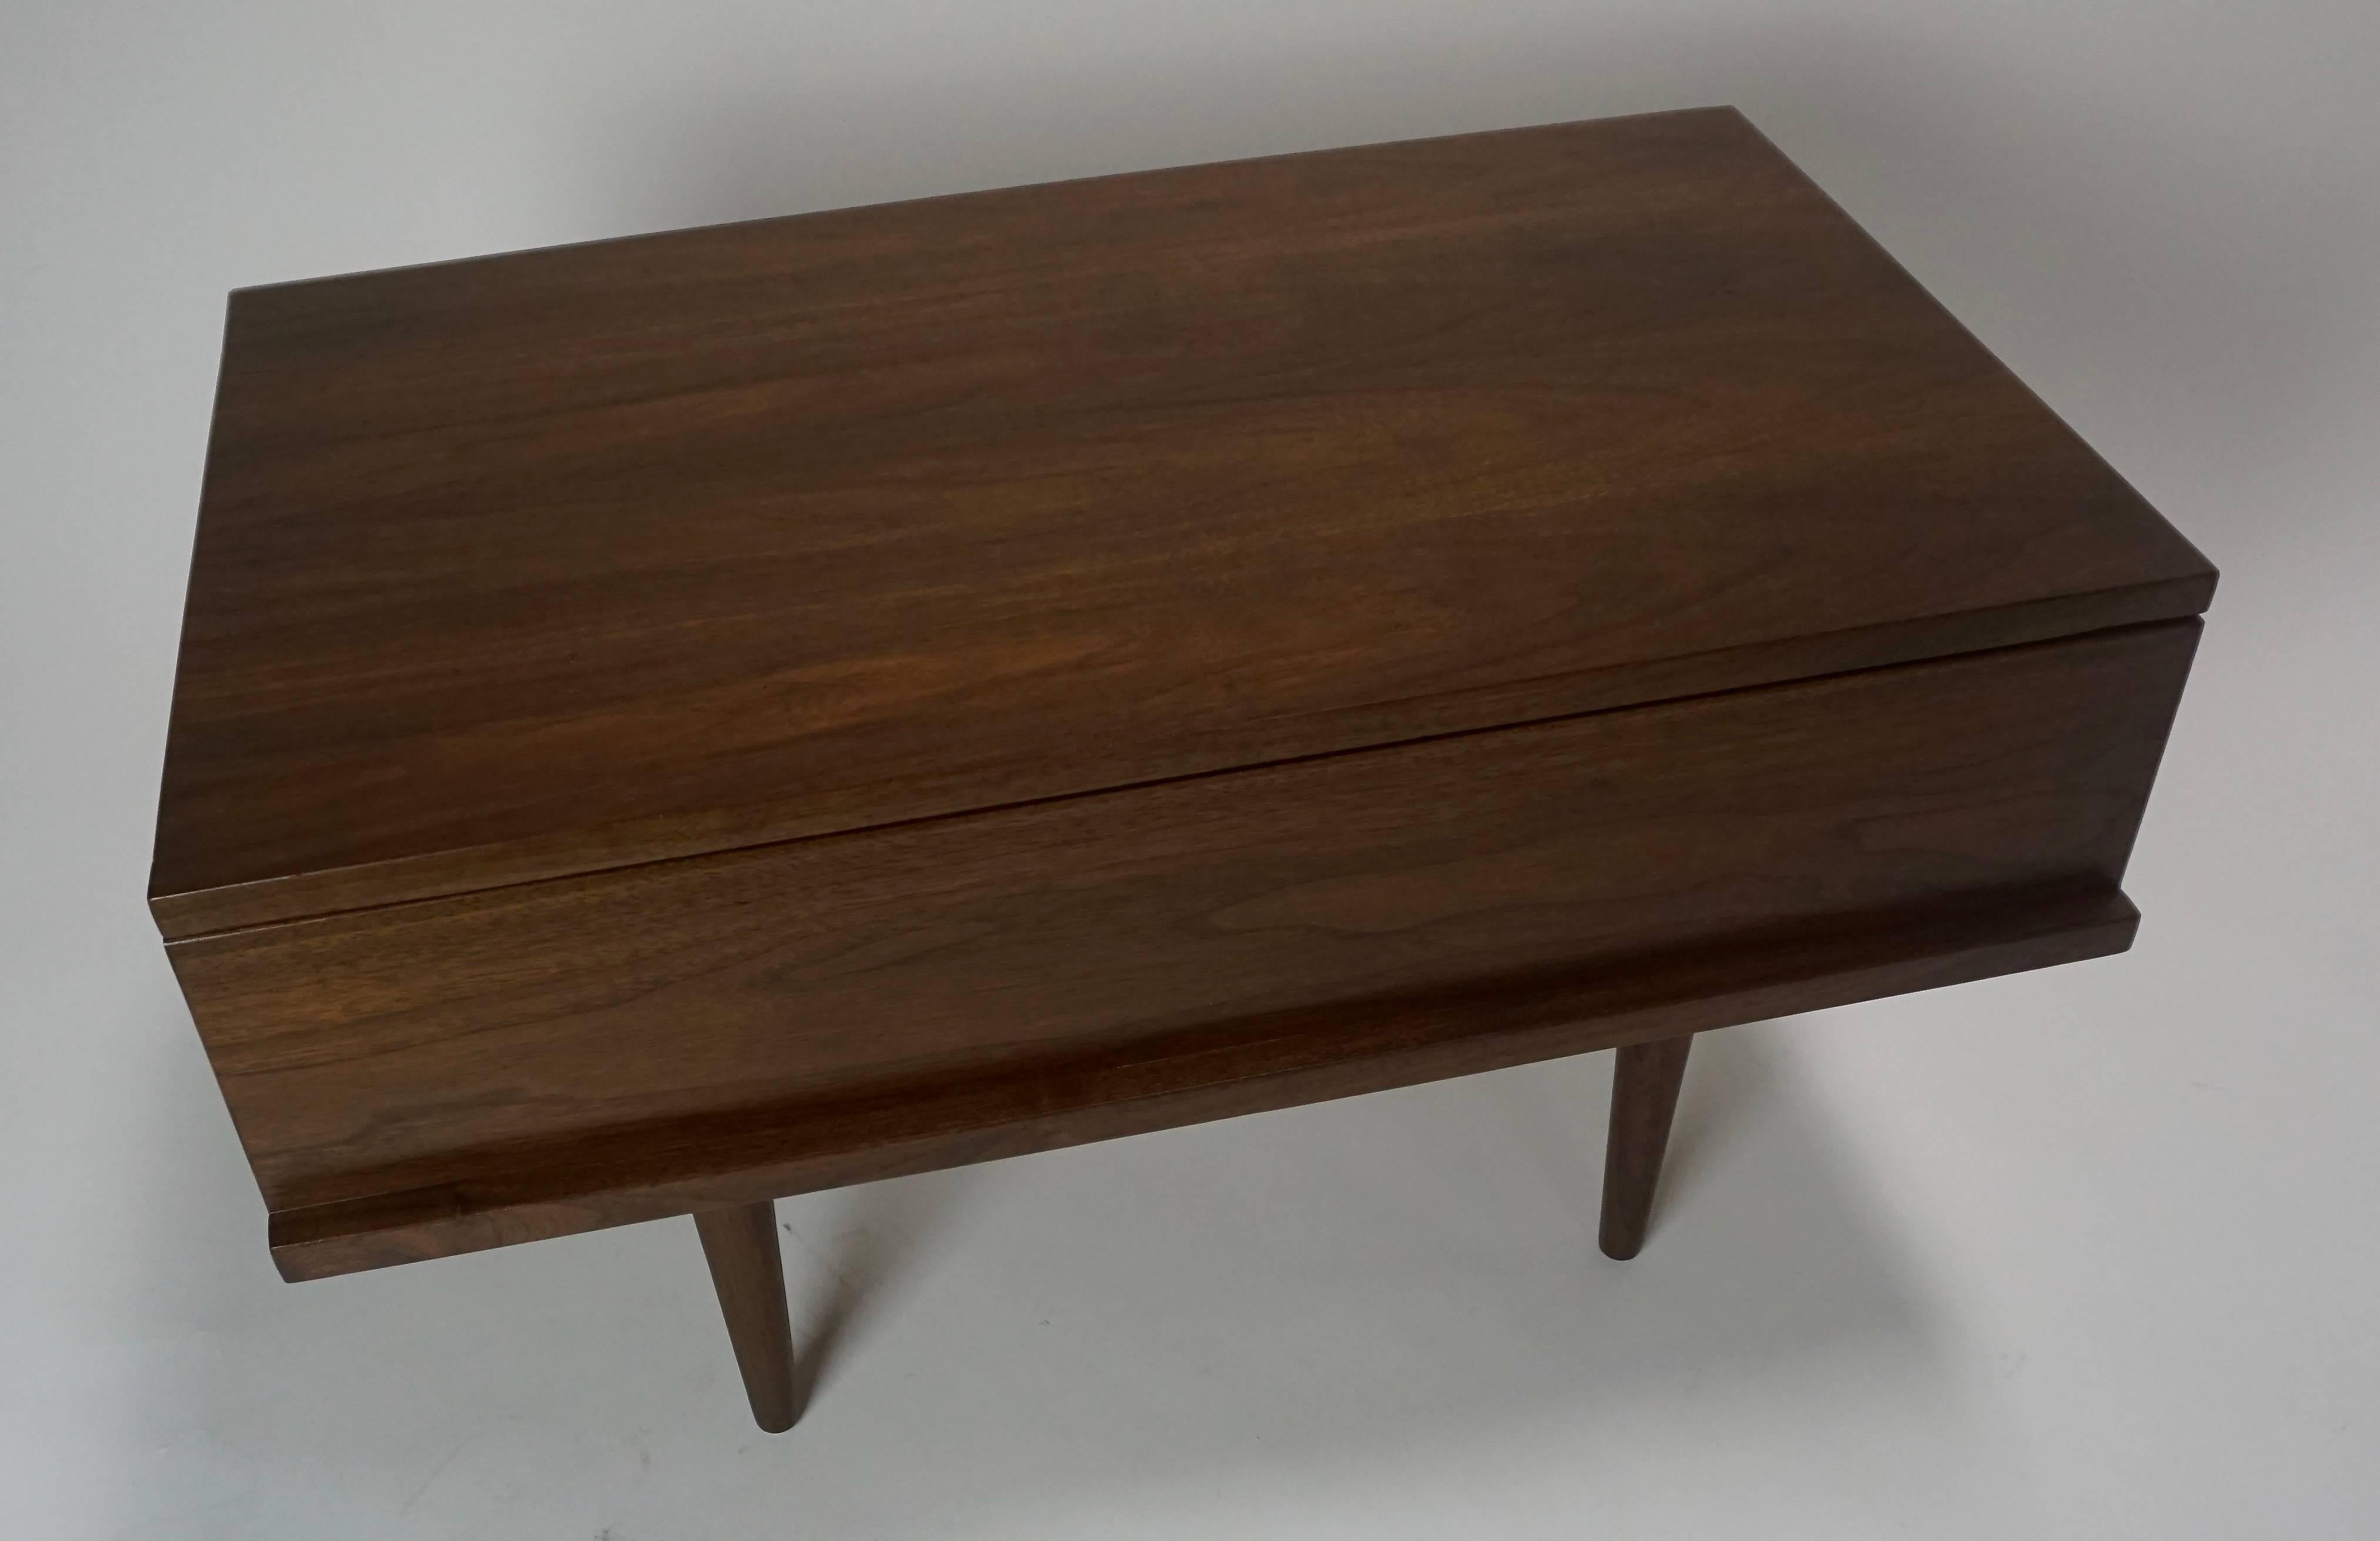 Made in NYC. Walnut with single drawer. Restored. Very simple construction. Just a few small dark scuffs under the finish.